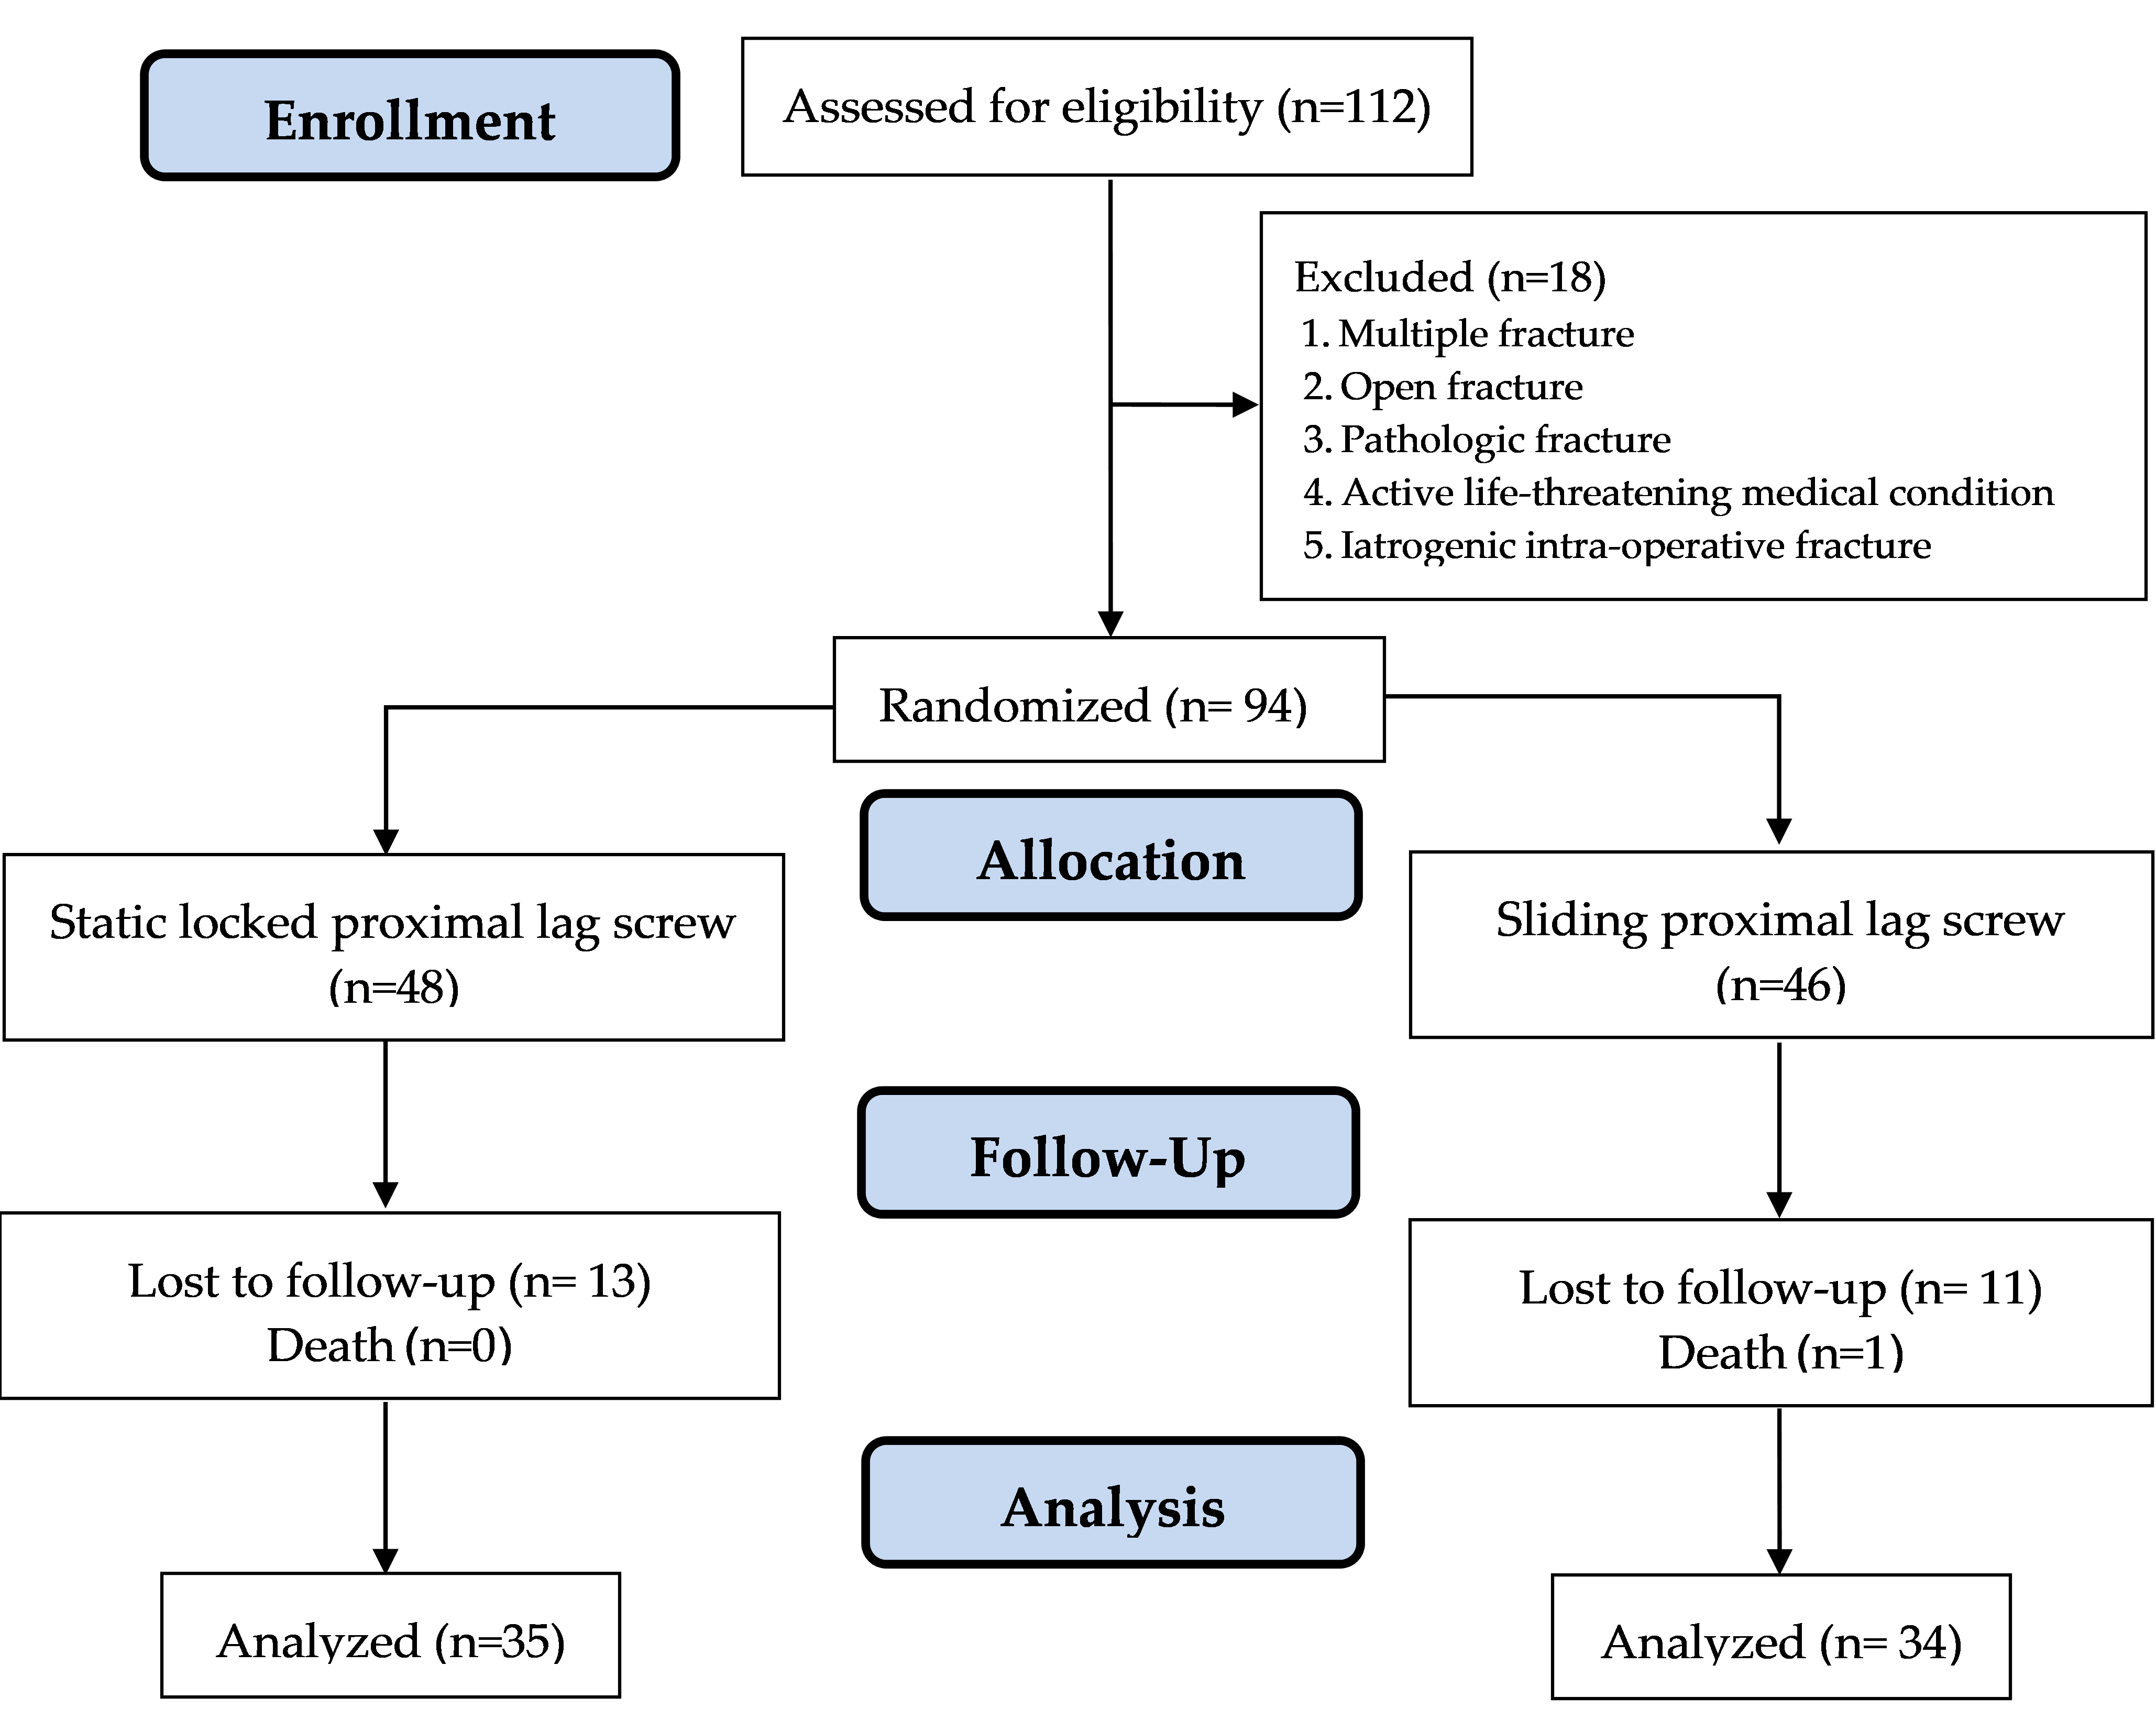 Comparison of Dynamic Versus Static Lag Screw Modes for Short Cephalomedullary  Nails in the Treatment of Unstable Intertrochanteric Fractures: A  Randomized Controlled Trial | Journal of Southeast Asian Orthopaedics